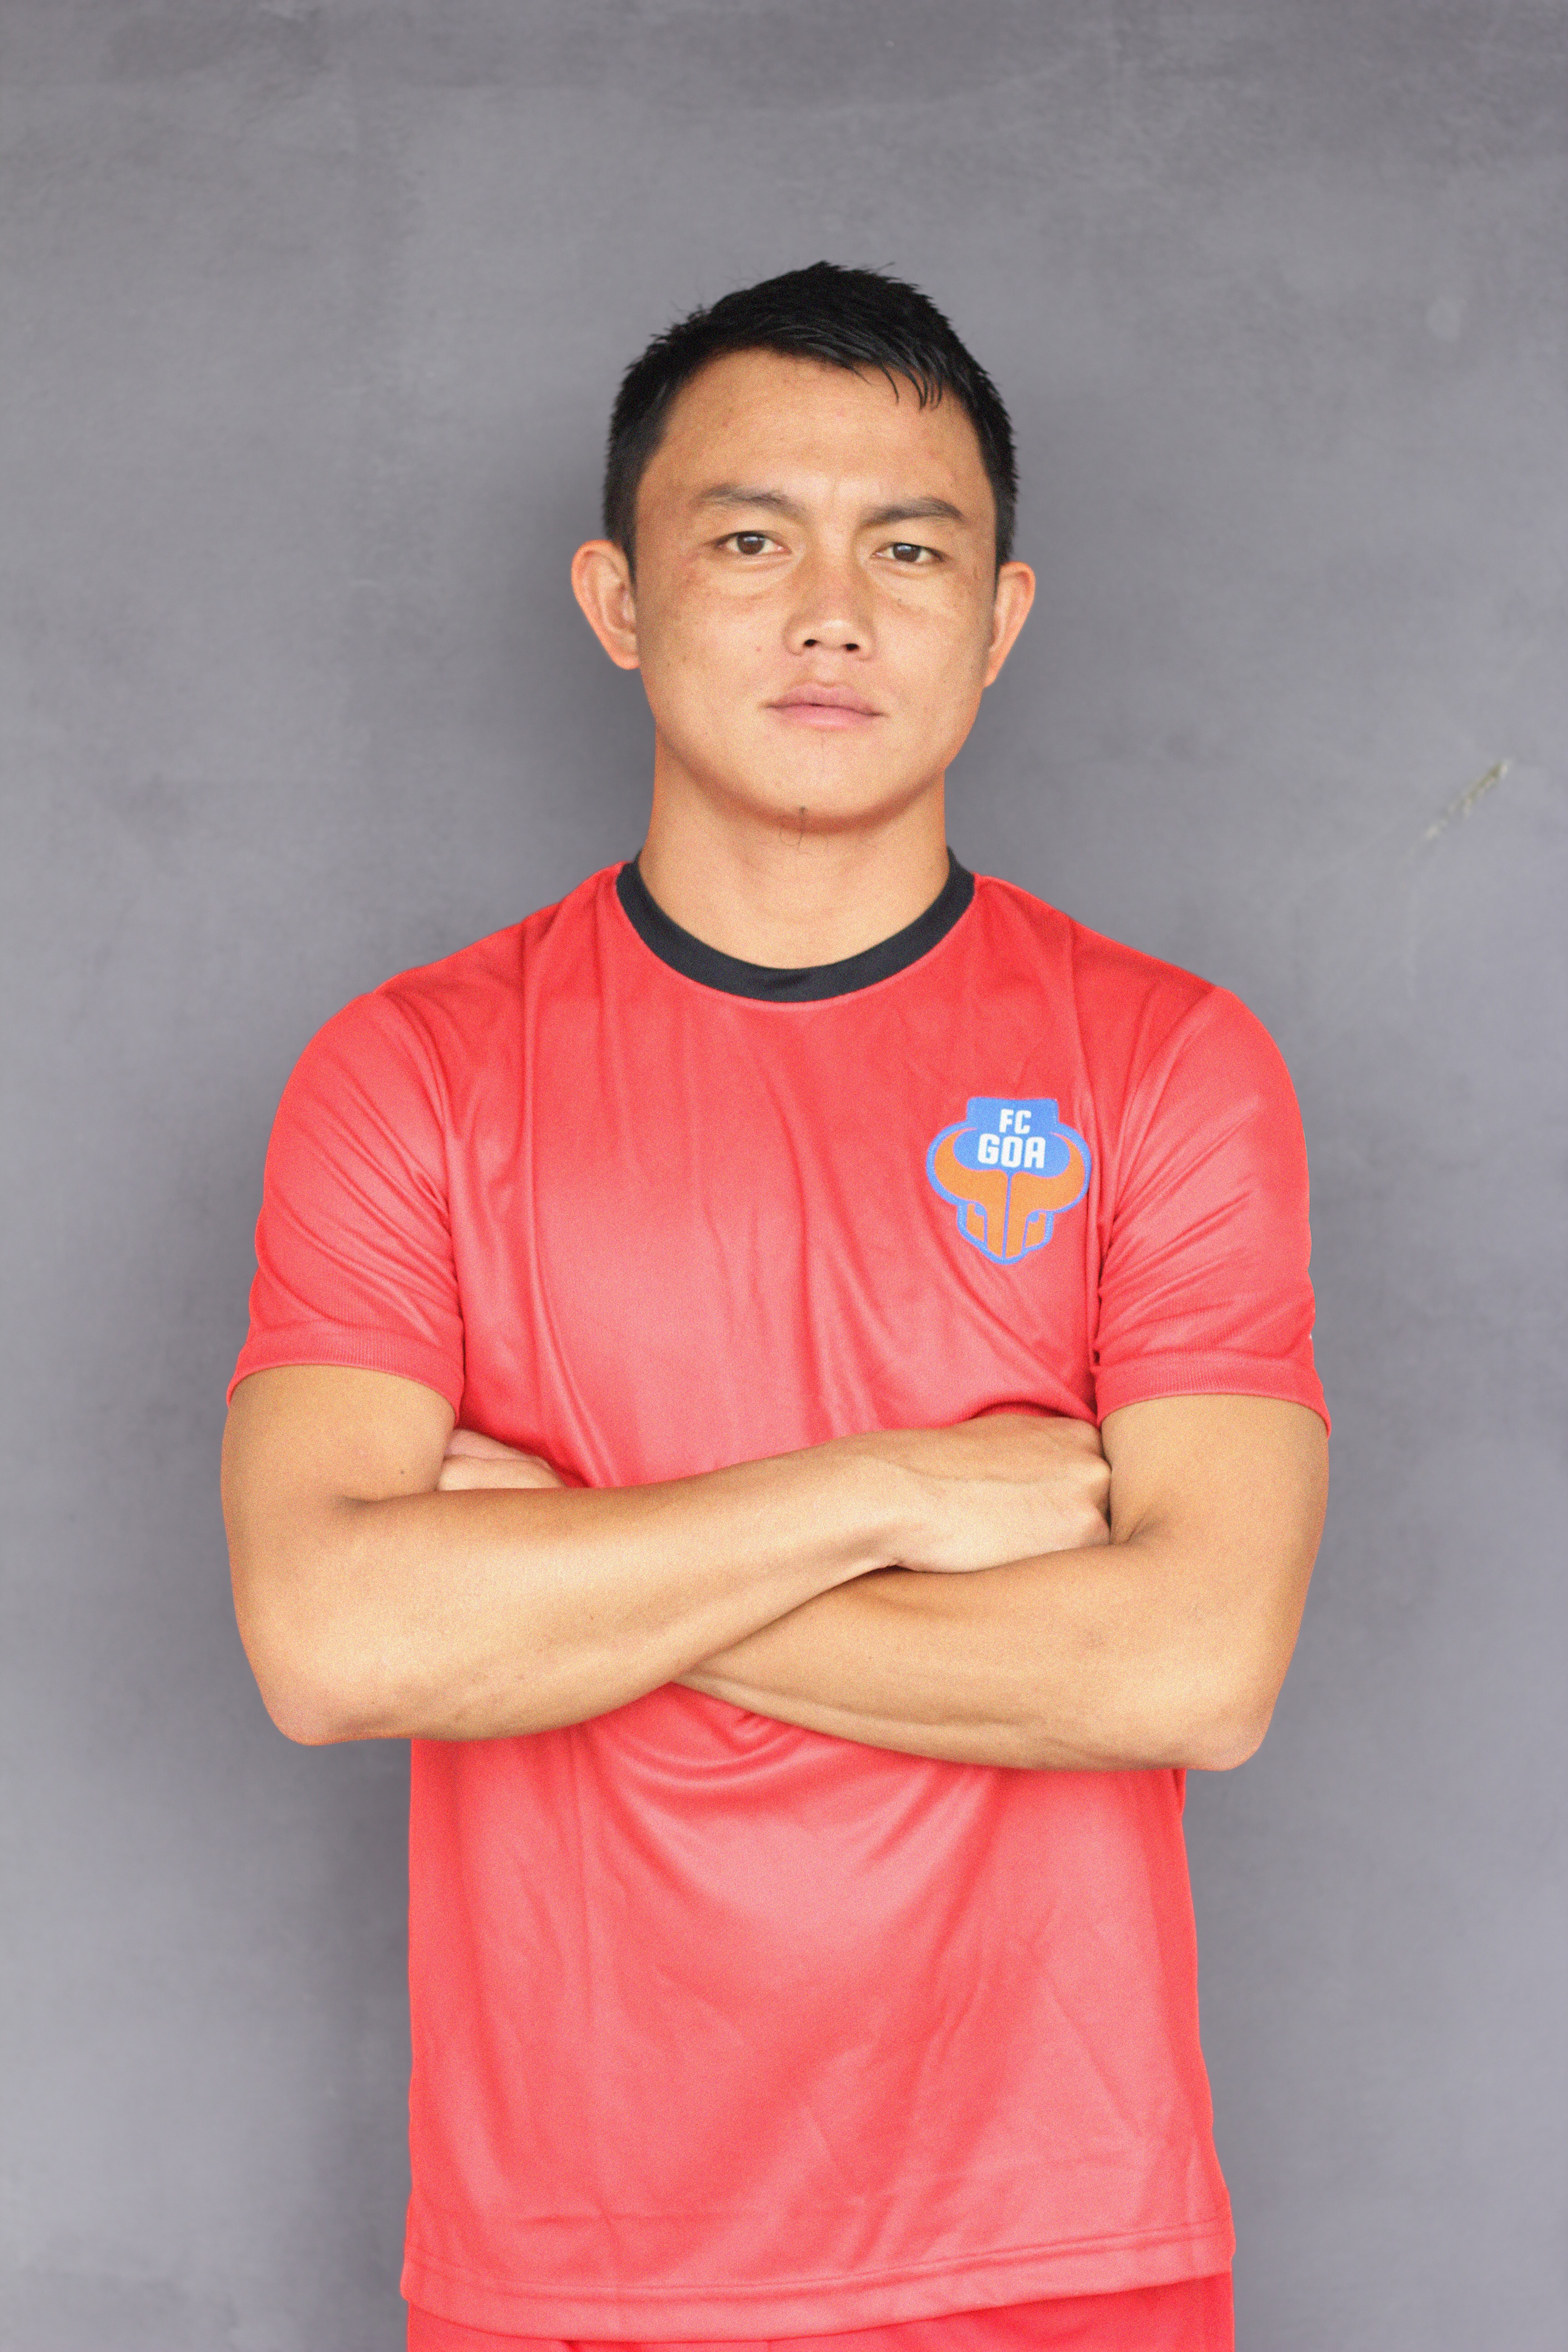 FC Goa unveils  Lalthuammawia Ralte as their third signing of the season